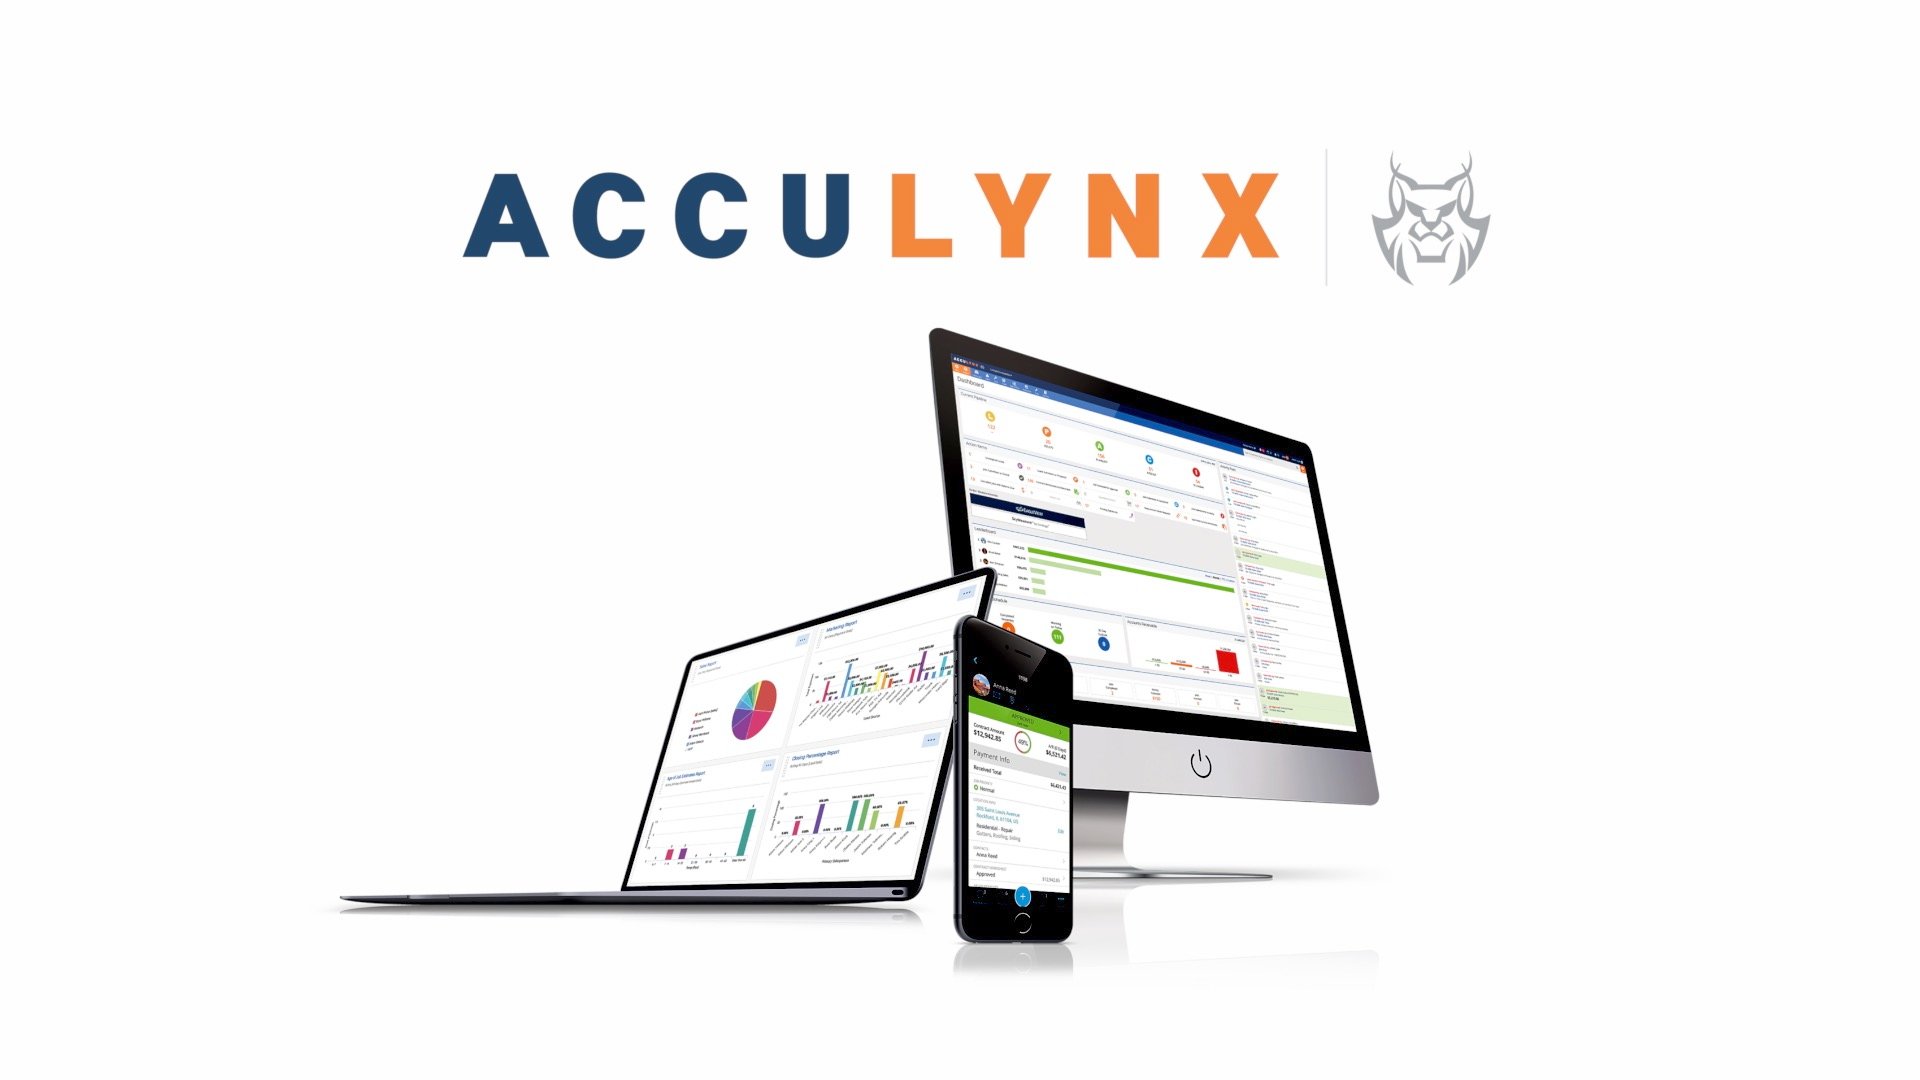 AccuLynx is the first and only all-in-one roofing contractor software designed to manage and streamline every aspect of a roofing business. It’s the easiest way to take your roofing company to the next level.